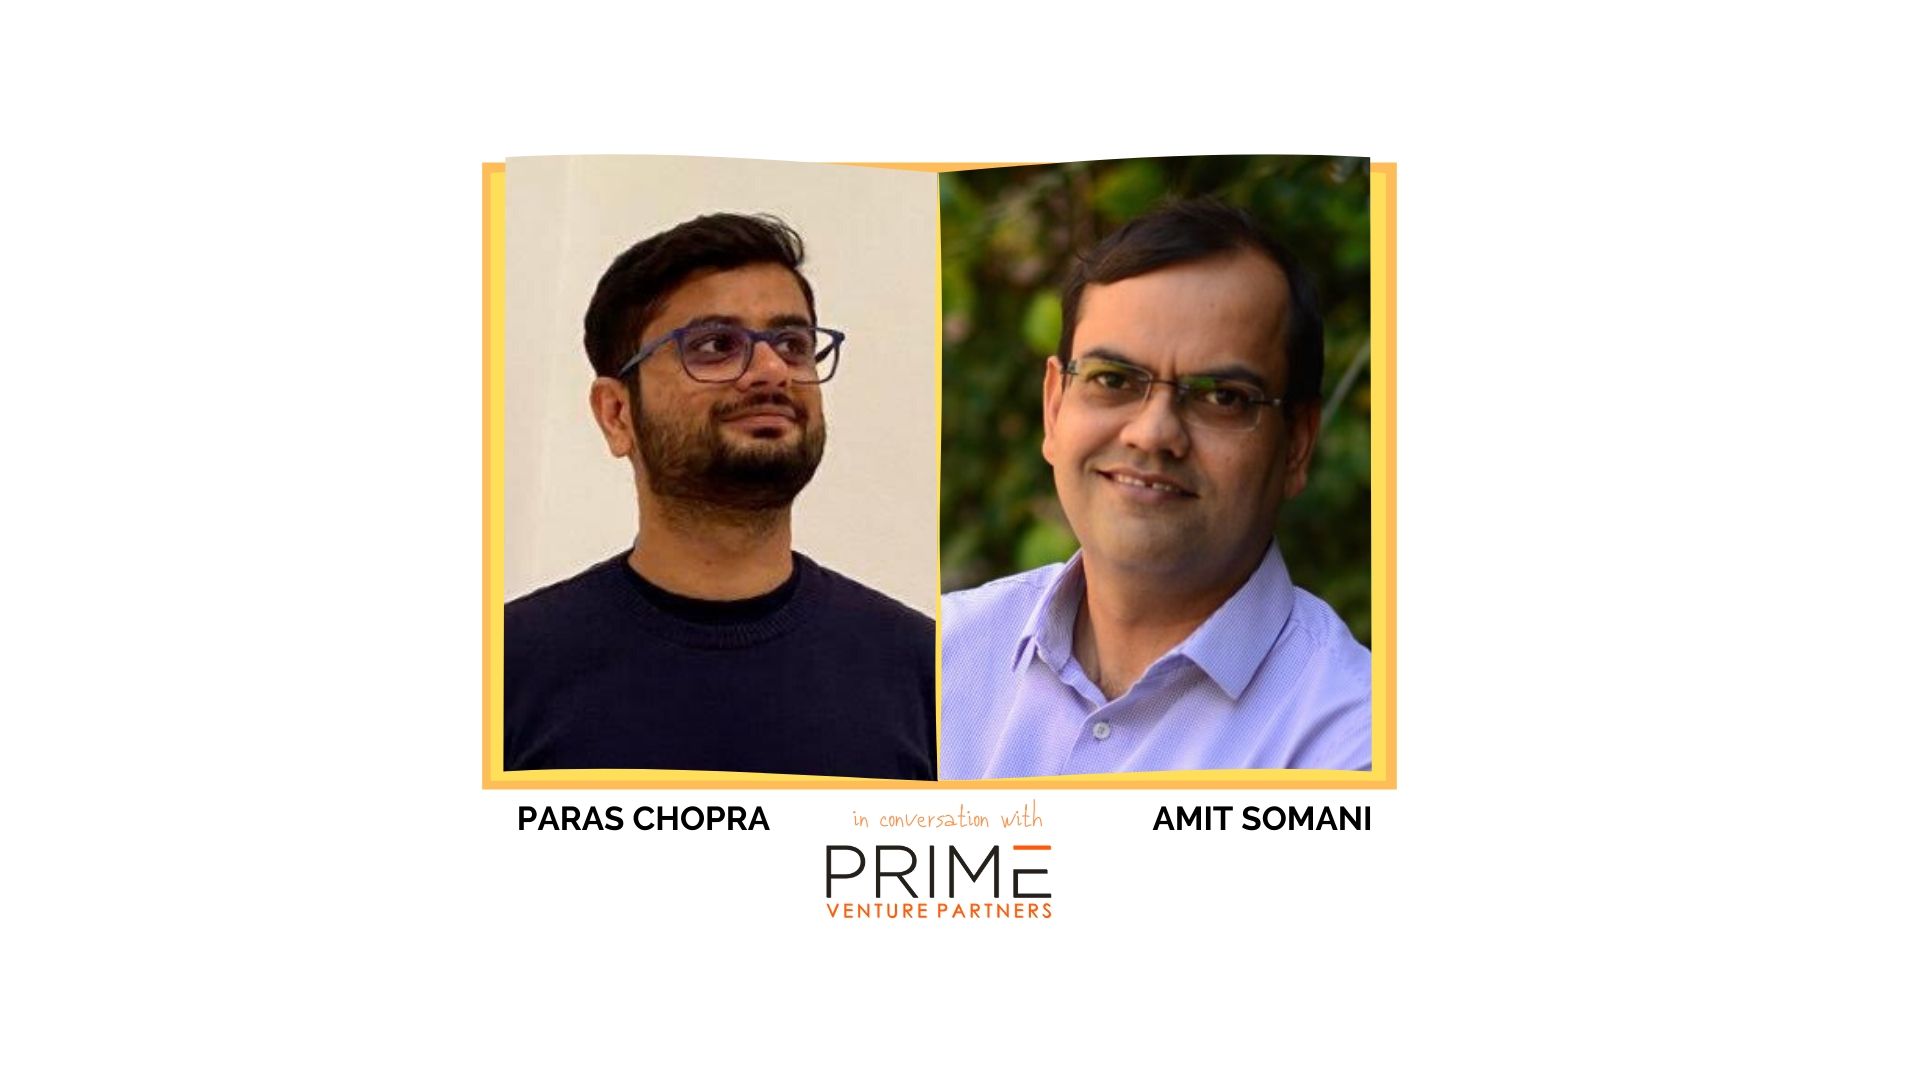 A graphic with guest(Paras Chopra) and host's (Amit Somani) name and image.